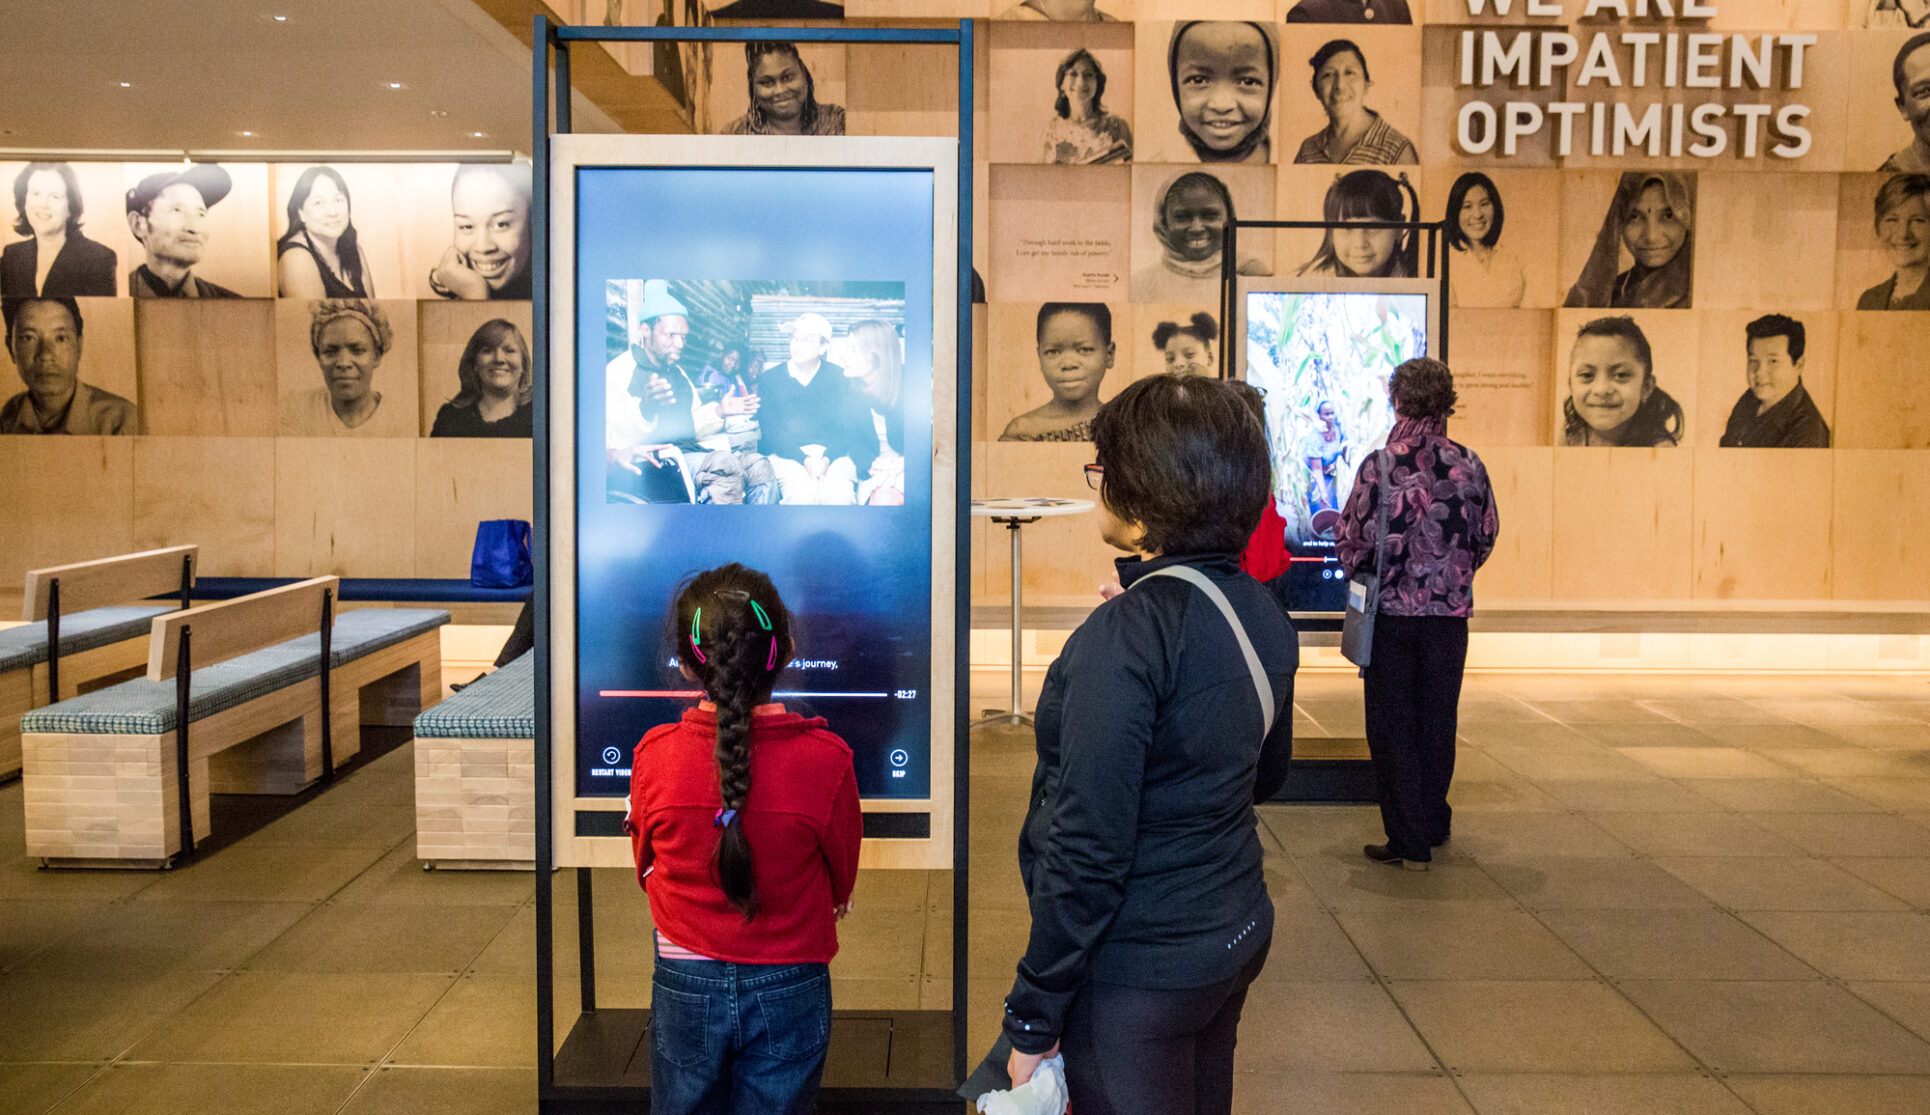 Visitors in the welcome gallery of the Discovery Center. The main feature is a young girl in a red shirt who is facing a screen and is in attendance with her guardian.